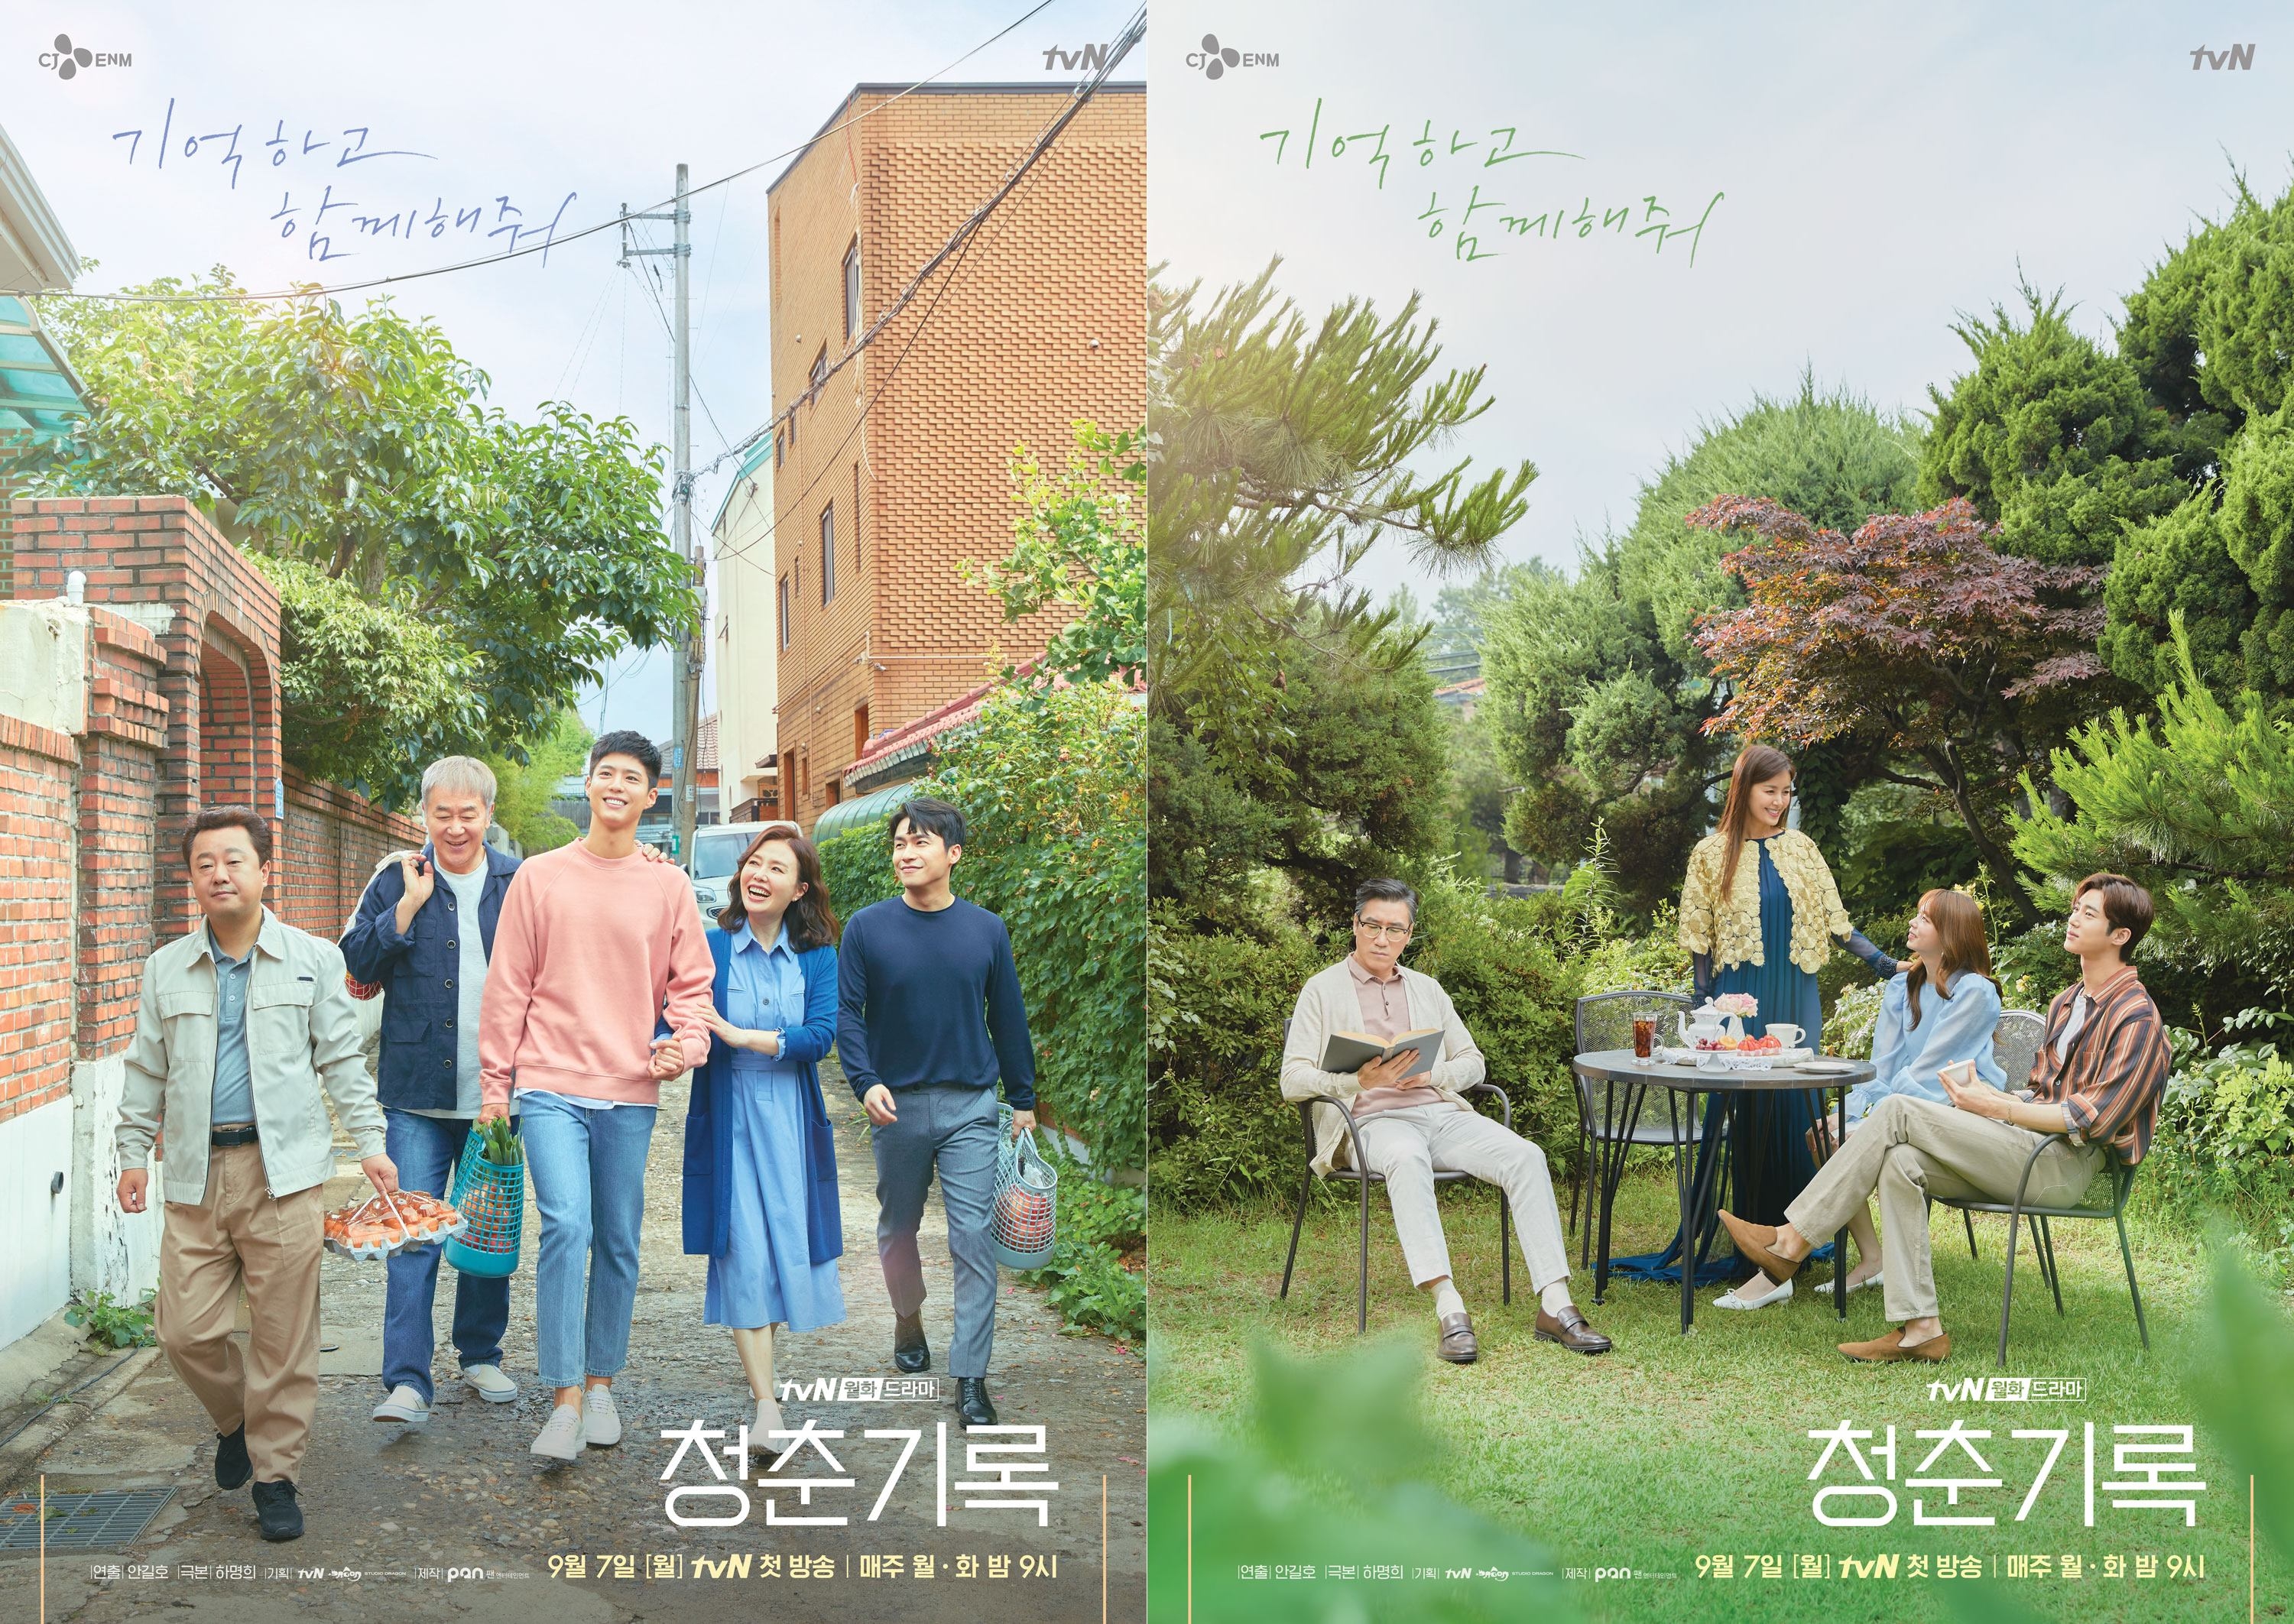 Record of Youth empathizes with the stories of Family who will fill the hot growth record of youth.On the 21st, TVNs new Mon-Tue drama Record of Youth production team released two posters featuring the family of two young people, Park Bo-gum and Byeon Wooseok, who have the same dream.Even if the visible scenery is different, expectations are focused on the stories of those who will keep their youth in their own way and grow together.Record of Youth draws the growth Record of Youth who try to achieve dreams and love without despairing on the wall of reality.The hot record of those who go straight to their dreams in their own way, the youth of this era, which has become a luxury even to dream, gives excitement and sympathy.The meeting of syndrome maker, which guarantees perfection, also ignites expectations.Director Ahn Gil-ho, who showed the power of detailed and delicate directing through Secret Forest, Memories of Alhambra Palace, and WATCHER, and writer Ha Myung-hee, who melts realistic eyes to warm and emotional stories such as Doctors and Love Temperature,The combination of acting veterans who do not need explanations such as Park Bo-gum, Park So-dam, Byeon Wooseok, Ha Hee-ra, Shin Ae-ra, Han Jin-hee, Park Soo-young and Seo Sang-won,The Family poster released on the day shows two families enjoying a sunny holiday.Although he is a friend who has never had the same dream, he and Sa Hye-joon, who grew up in a slightly different environment, and Won Hae-hyo, who grew up in the same environment.The alleyway that returns home to the side by side, the steps of Sa Hye-joon Family, who has a simple but laughing flower, are full of happiness.The look of Han Ae-suk (Ha Hee-ra), who is friendly with his son, who is blunt but willing to take the burden of his wife, and Lingnan (Park Soo-young), who is a fashionista grandfather who keeps behind his grandson, who resembles a warm smile, and his model brother, Sa Kyung-joon (Lee Jae-won), catches the eye.It is an uneasy youth who has not achieved anything, but it is noteworthy whether Sa Hye-joon can achieve his dream in the arms of Family, which is always on my side.It is interesting to see Won Hae-hyo Family enjoying tea time in Garden, which is quite different from the noisy Sa Hye-joon Family, but love for children is not as different.Lee Young (Shin Ae-ra) who is smiling brightly by her husband Won Tae-kyung (Seo Sang-won), who is in a trilogy of reading.The eyes of his son Won Hae-hyo and his daughter Hannah Jeter (Joe-Jeong) feel the affection of the enthusiasm who does not mind the close management of his child.I wonder if Won Hae Hyo, who wants to succeed with effort rather than background of Family, can achieve his dream of Actor with his own power.Park Bo-gum and Byeon Wooseok are breaking down and breathing with models Sa Hye Jun and Won Hae Hyo that run toward the dream of Actor.Two mothers Han Ae Sook and Kim Lee Young with different backgrounds and values ​​are taken by Ha Hee-ra and Shin Ae-ra respectively.The story of two mothers who have different cheering methods, support, and love laws for their sons with the same dreams will be sympathetic.Han Jin-hee, the grandfather of Sa Hye-joon, who is armed with an extraordinary ki, presents his grandson Park Bo-gum and a special chemistry.Samingi, who cares for his grandson and cheers more than anyone else, is a strong challenge to life that is not over yet, although he is eating snowballs among family members.Actor Park Soo-young and Seo Sang-won will take on the father of Sa Hye-joon and the father of Won Hae-hyo, Won Tae-kyung, respectively, and add weight to the character of individualist model Sa Hye-joons brother, Lee Jae-won, The energy adds vitality.The realistic story of Family, which is the growth of youth, is sympathetic.Watching Sa Hye-joon and Won Hae-hyo Family will also be another fun Urea. Family, who is a force by the youthful youth, and those who will complete a page of youth record along with youth romance.On the other hand, tvNs new Mon-Tue drama Record of Youth will be broadcasted at 9 pm on September 7th.